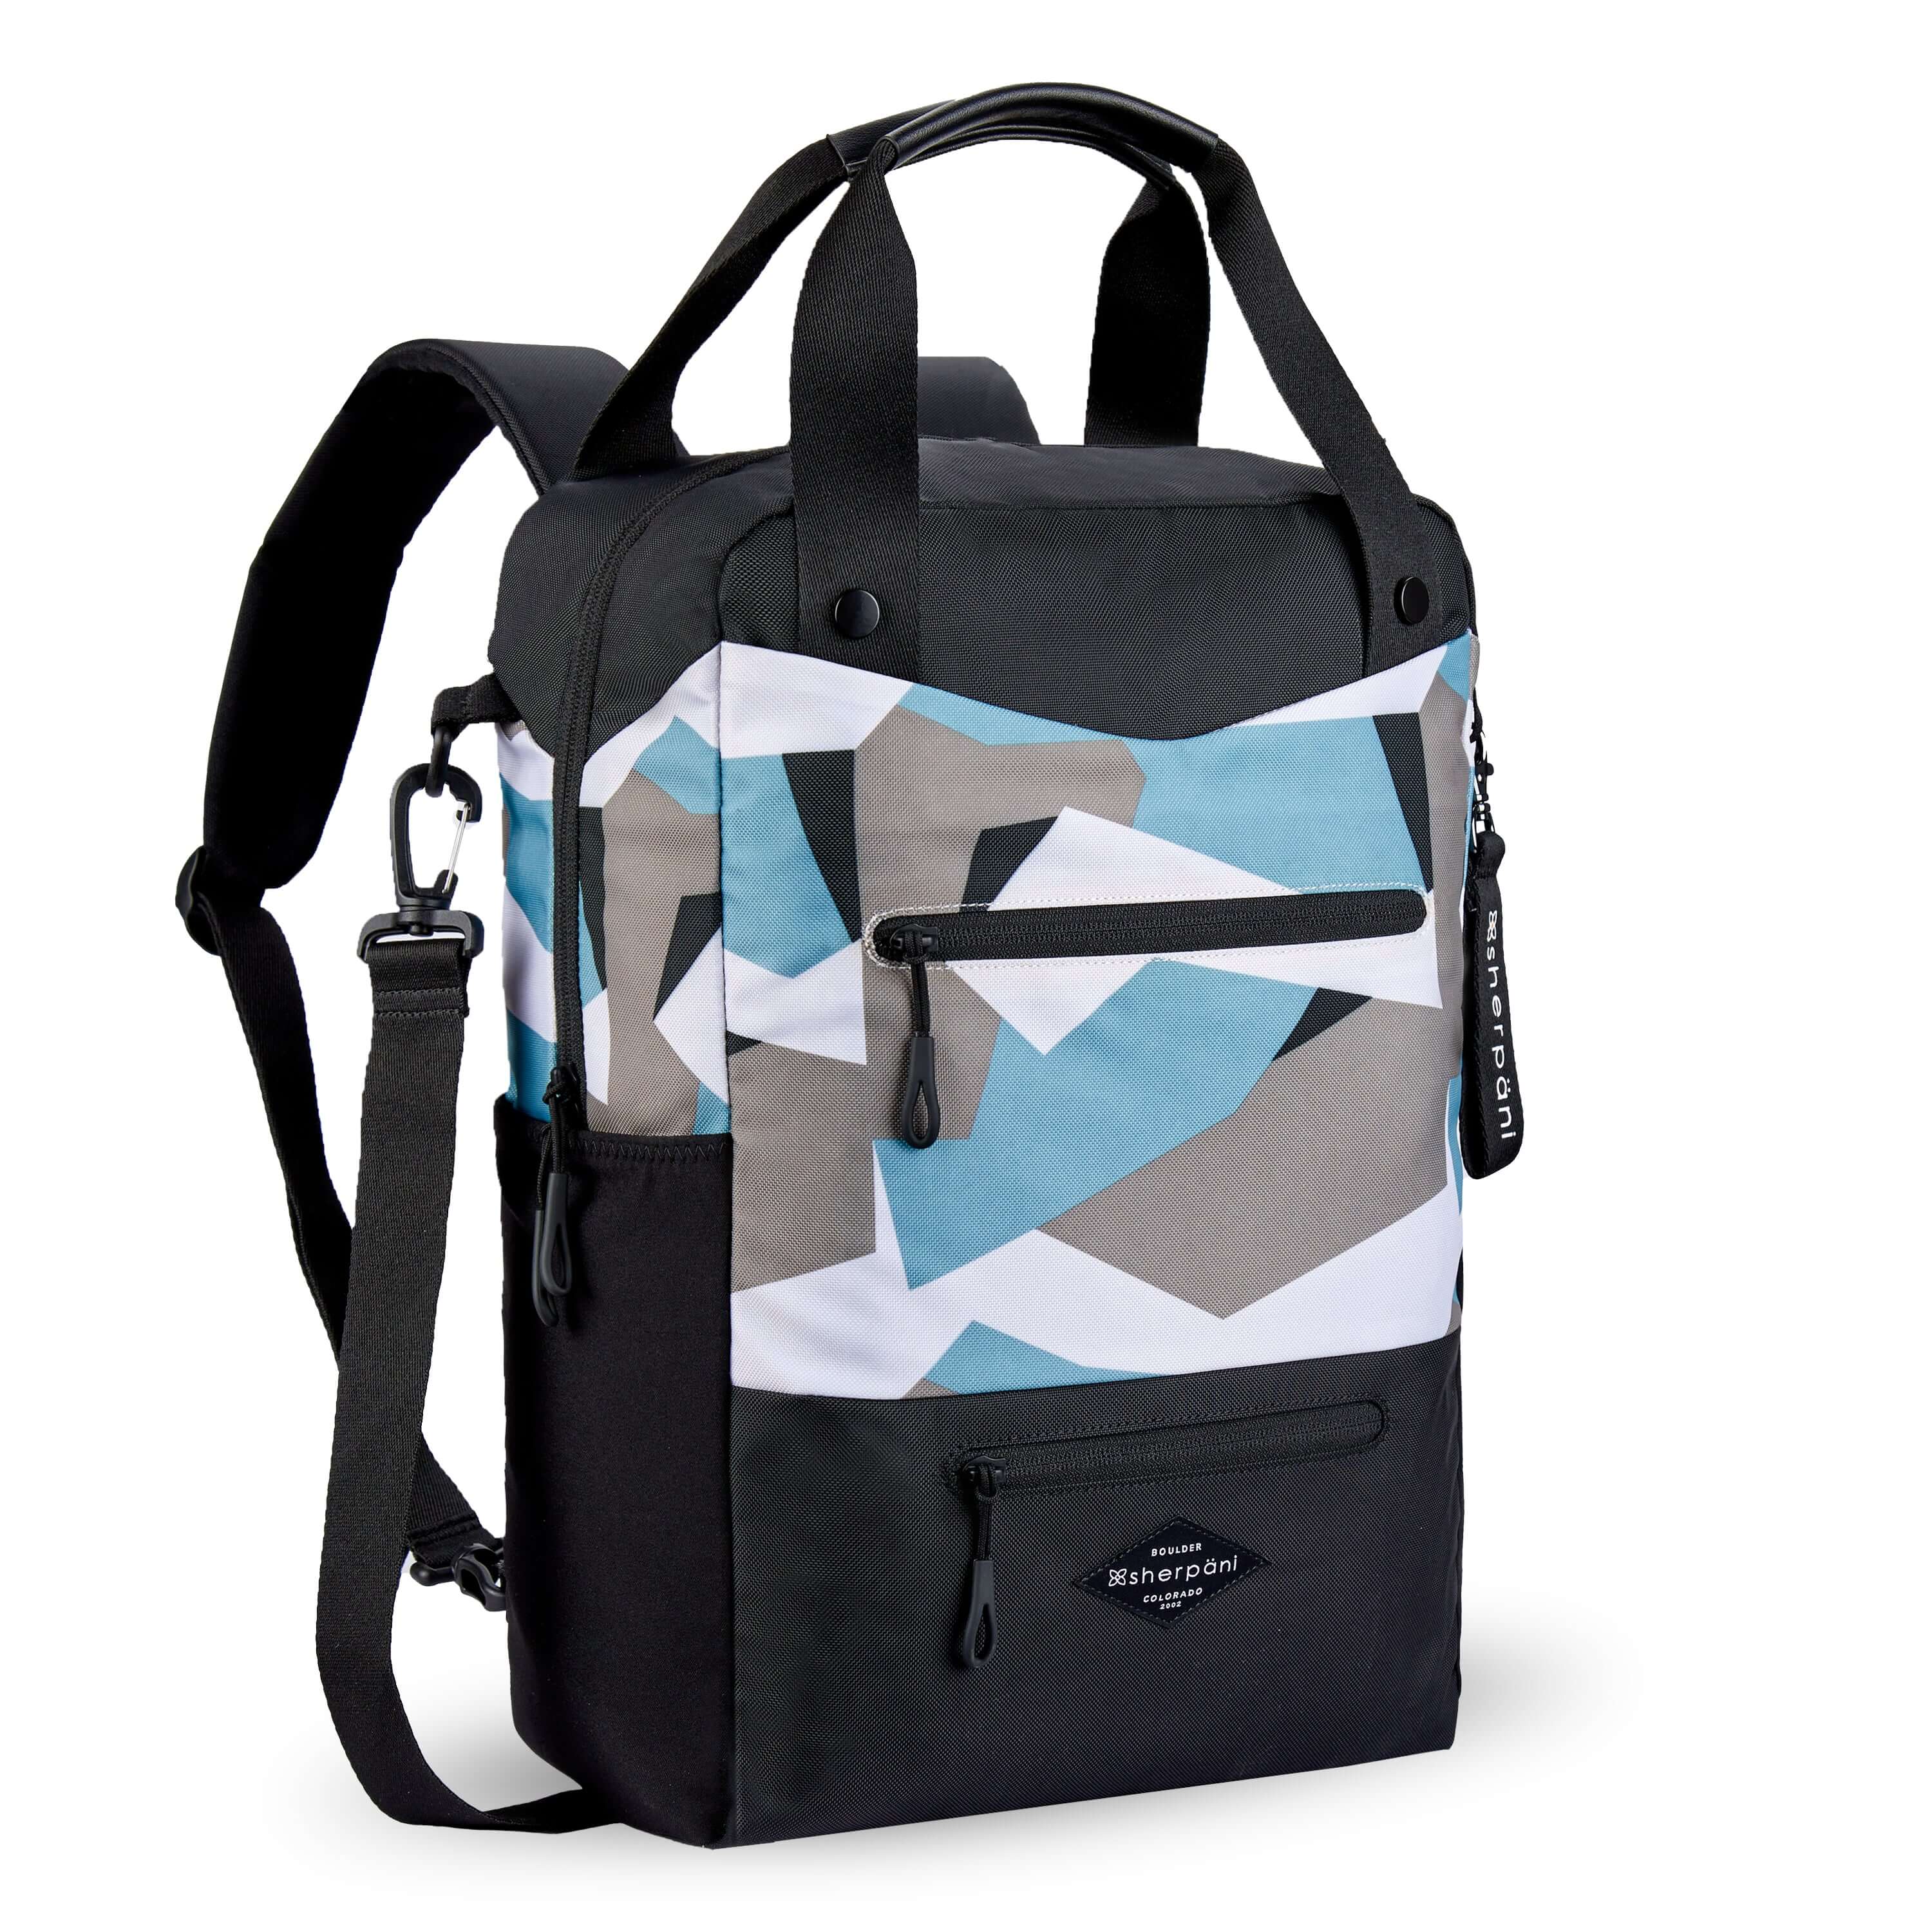 Angled front view of Sherpani's three in one bag, the Camden in Summer Camo. The bag is two toned in black and in a camouflage pattern of blue, grey and white. There are two external zipper pockets on the front panel with easy pull zippers in black. A branded Sherpani keychain is clipped to the upper right corner. An water bottle holder sits on either side of the bag. The bag has an adjustable crossbody strap, padded/adjustable backpack straps and short tote handles fixed at the top. 